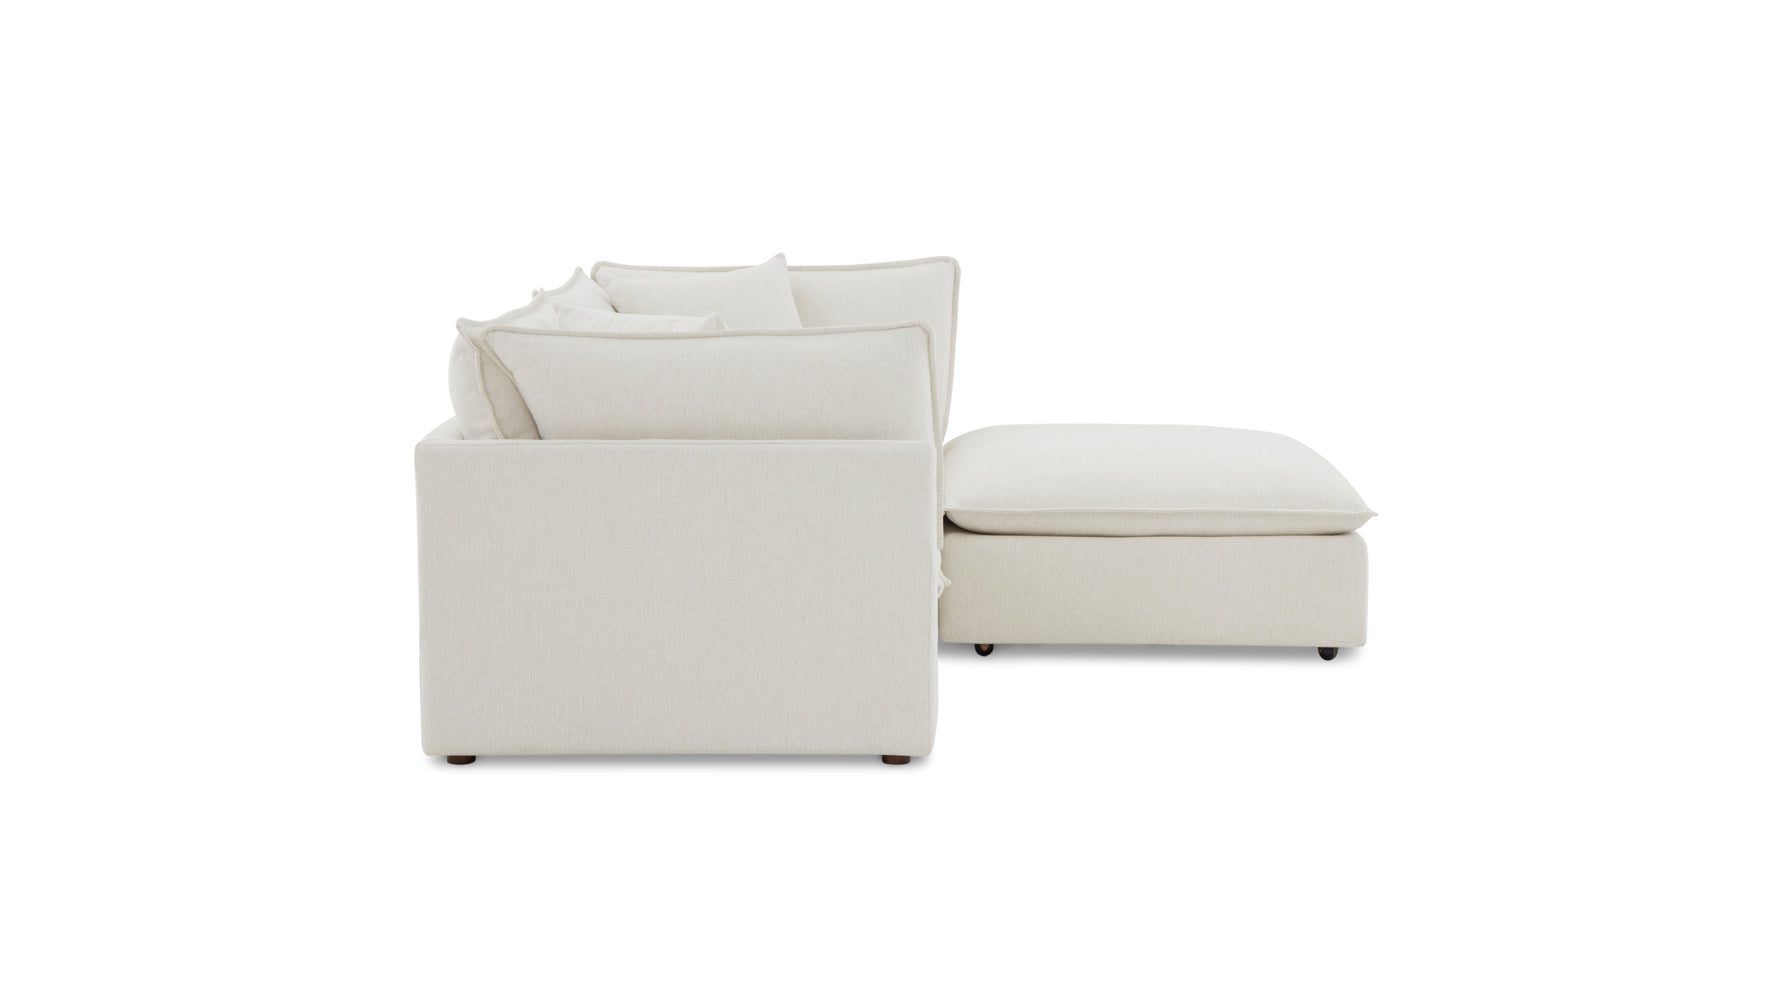 Chill Time 3-Piece Modular Sectional, Birch - Image 4